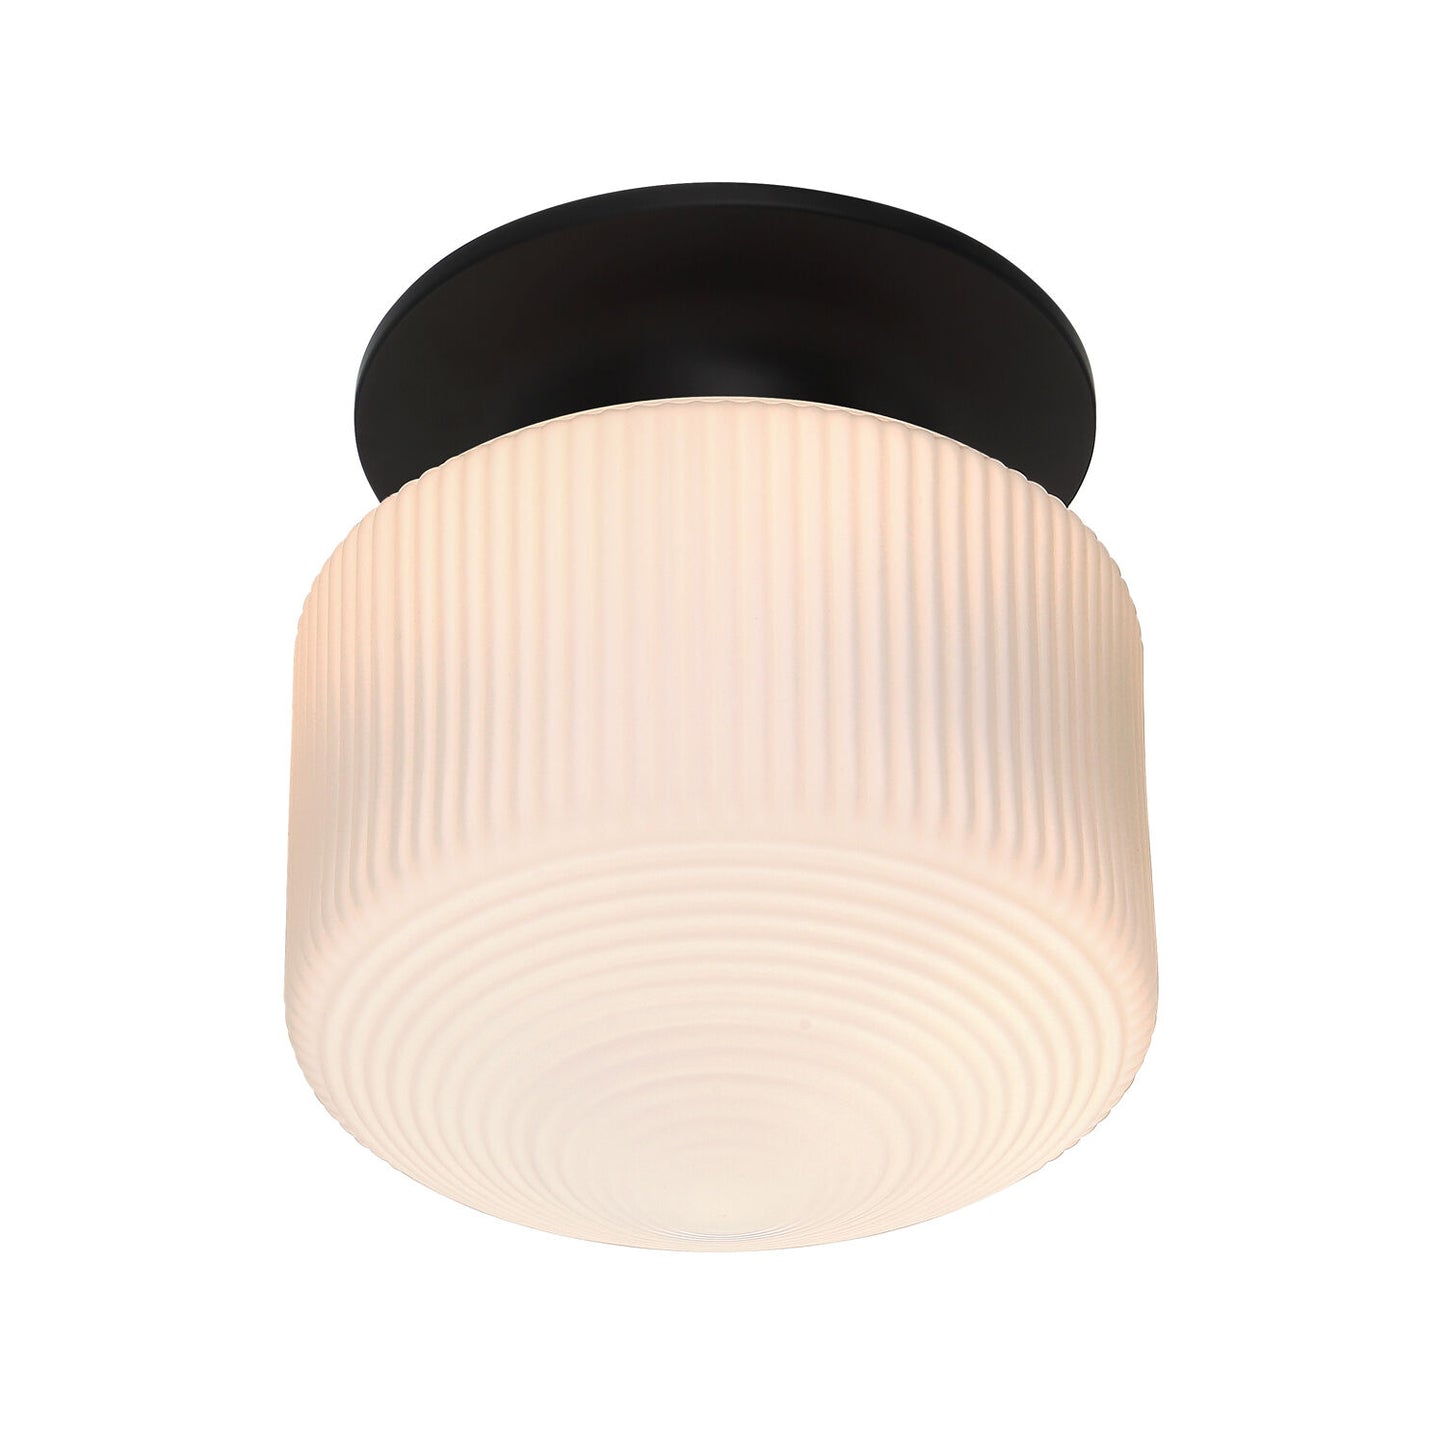 Ceiling Light With Opal Glass Shade